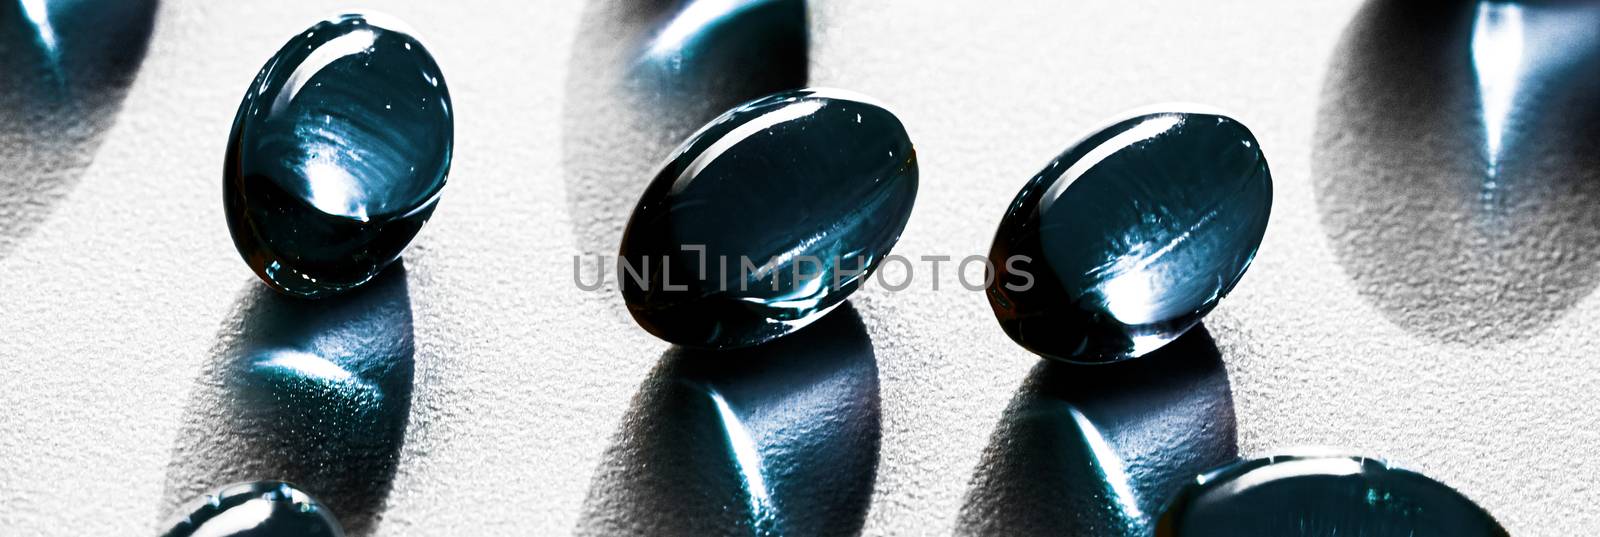 Blue herbal capsules for healthy diet nutrition, pharma brand store, probiotic drug pills as healthcare or supplement products for pharmaceutical industry ads